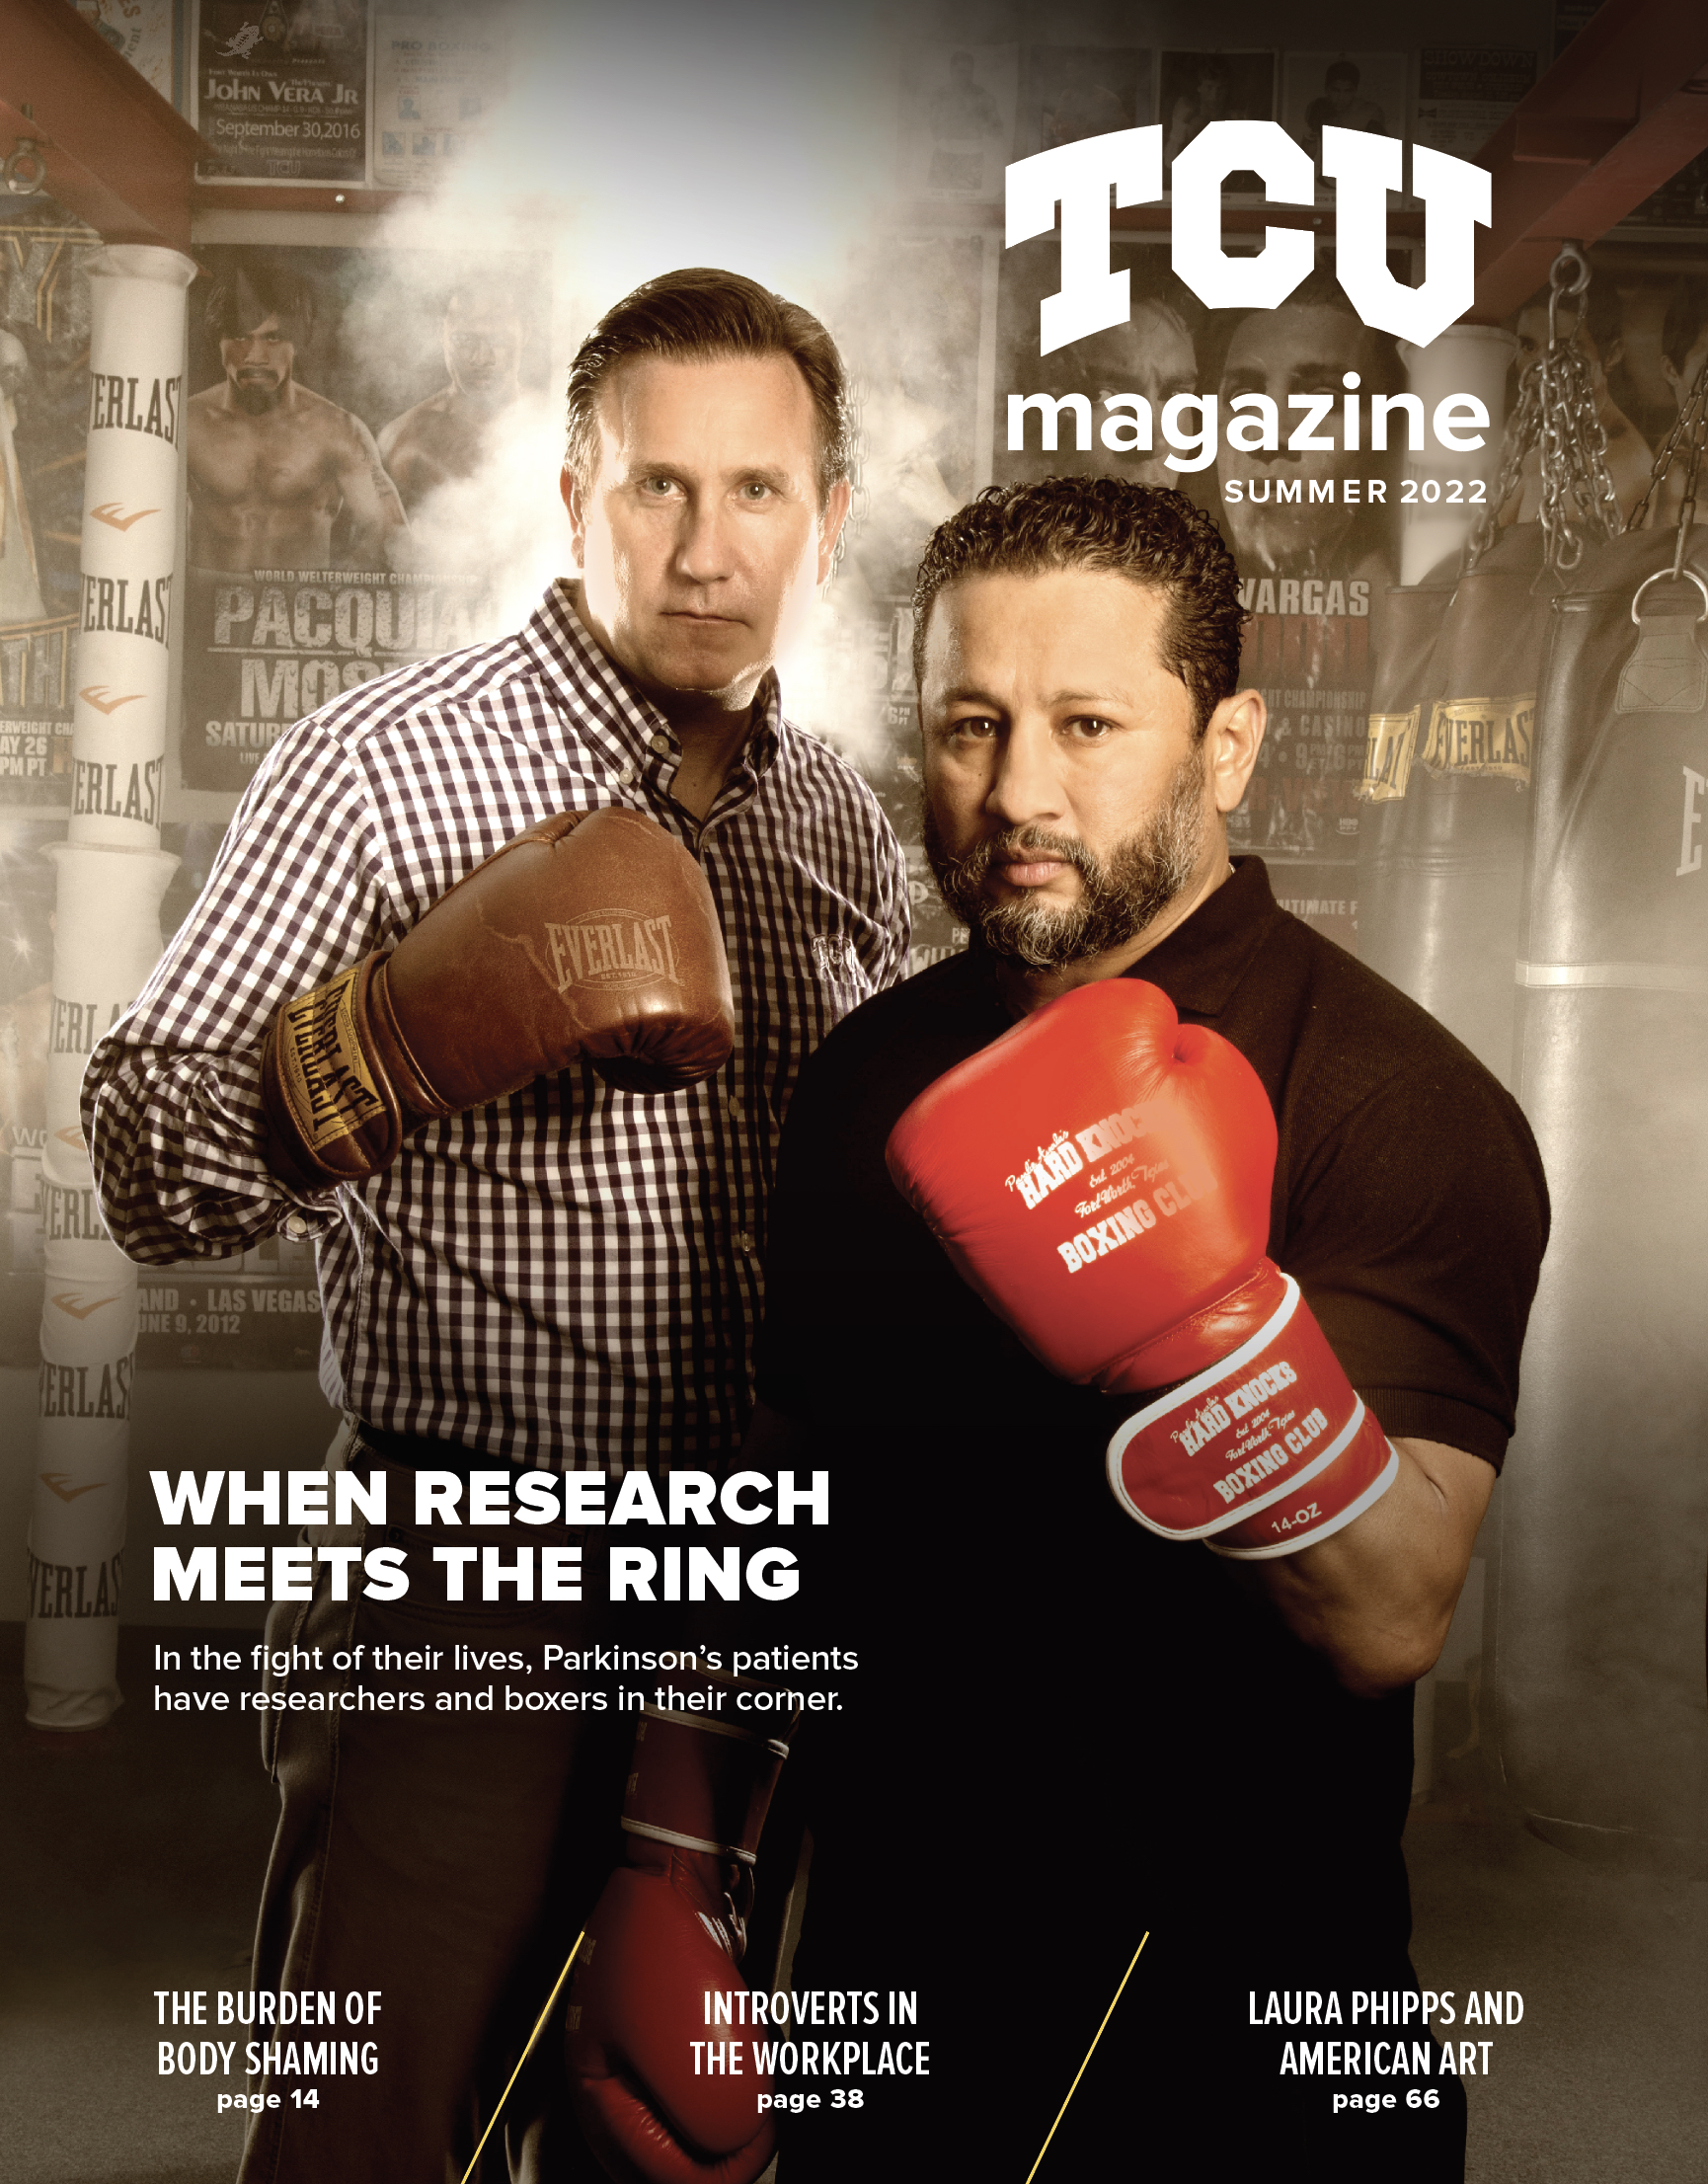 TCU Magazine Summer 2022 edition featured researcher Chris Watts and boxer Paulie Ayala on the over.